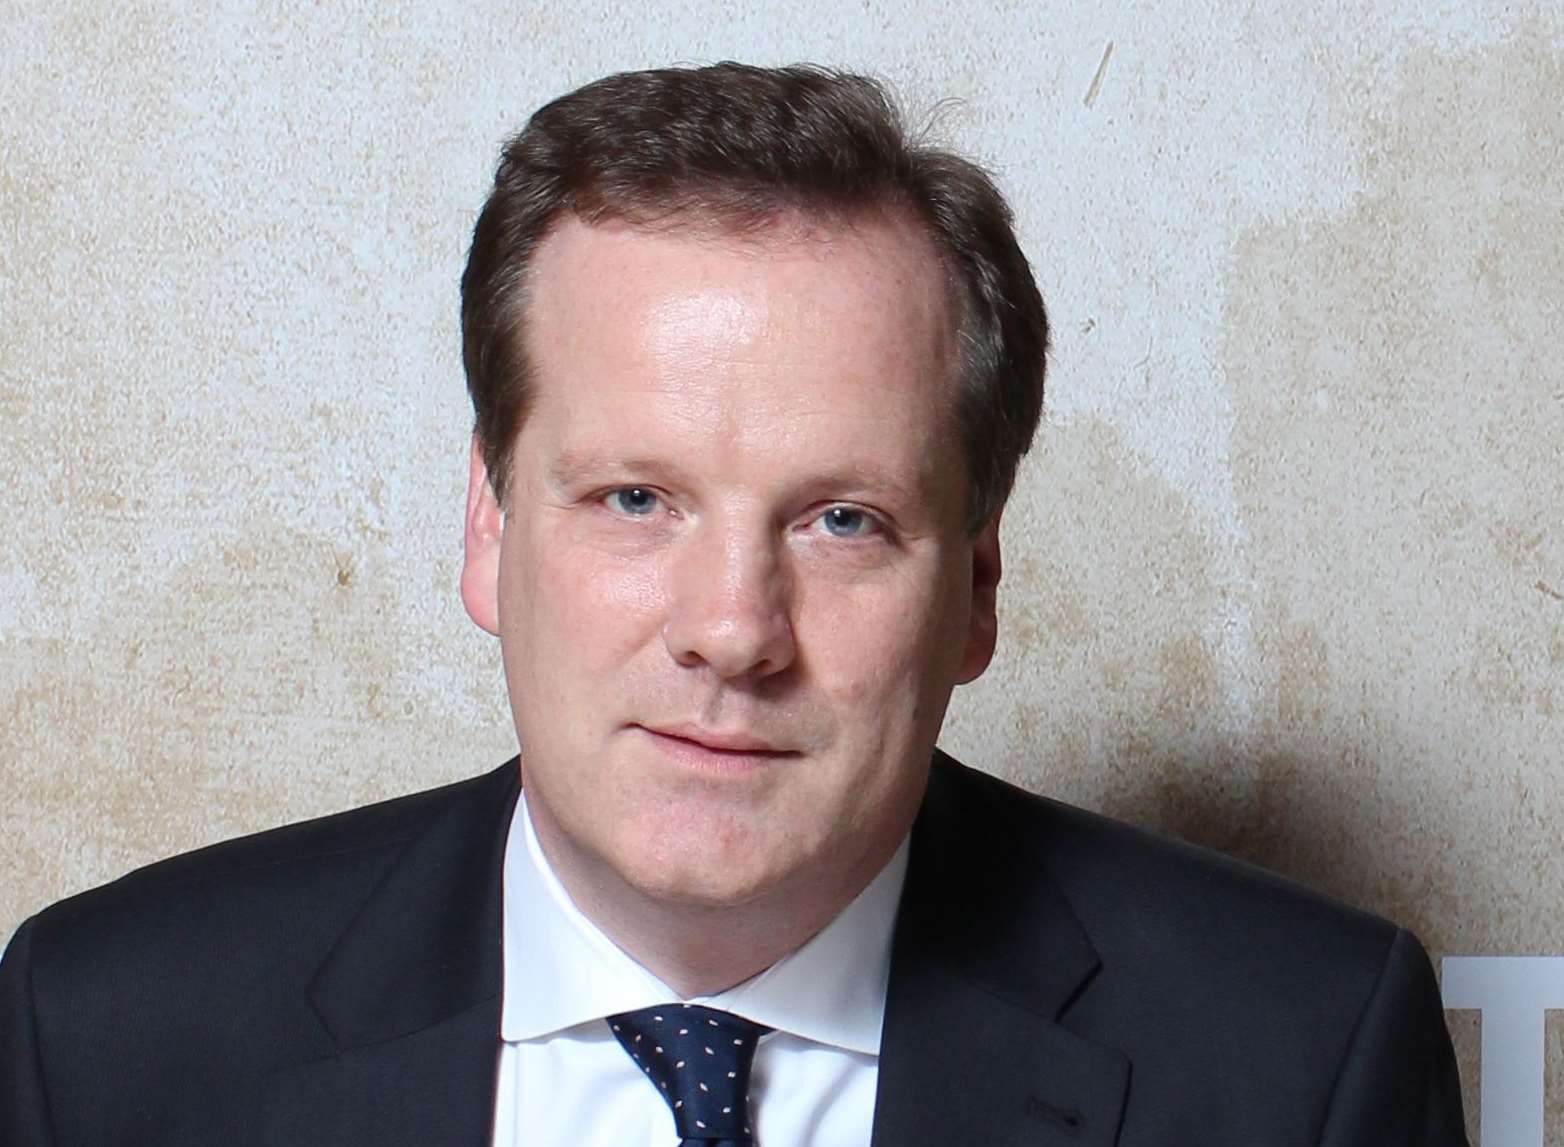 MP of Dover and Deal, Charlie Elphicke